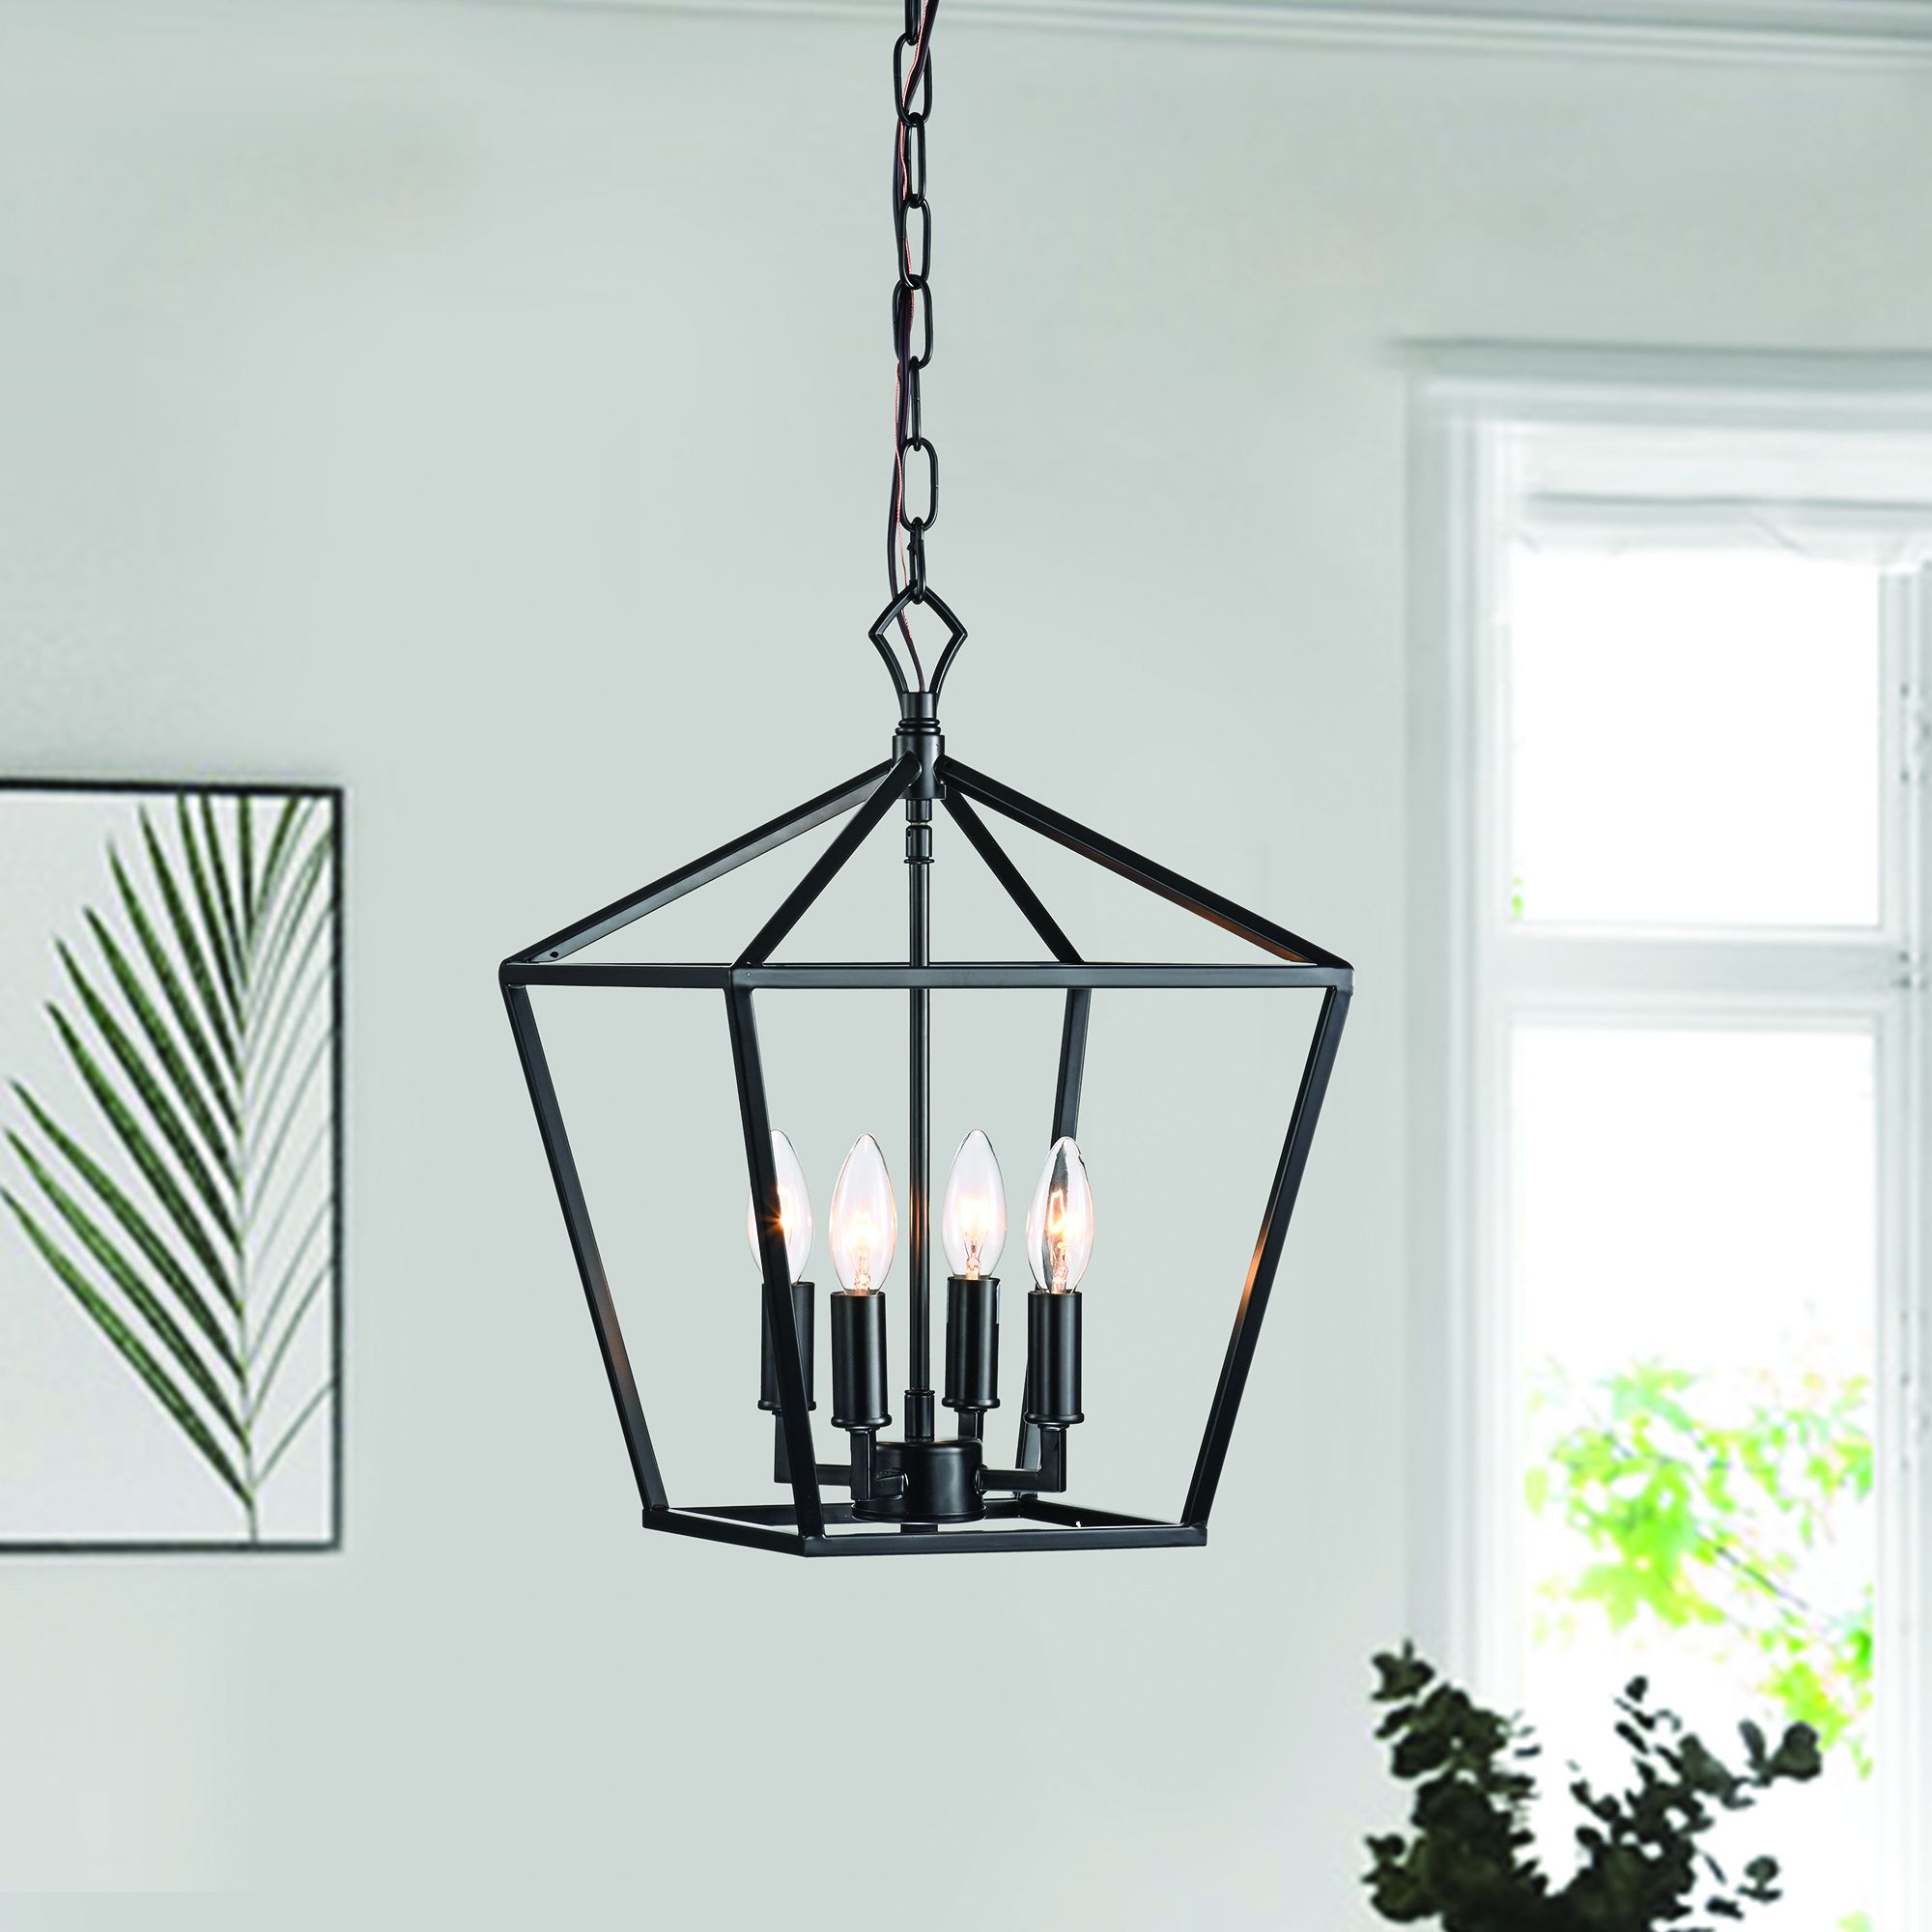 Flat Black Lantern Chandeliers Throughout Latest 4 Light Matte Black Lantern Pendant Chandelier 16 In With Nickle Or Black  Sleeve – Edvivi Lighting (View 3 of 15)